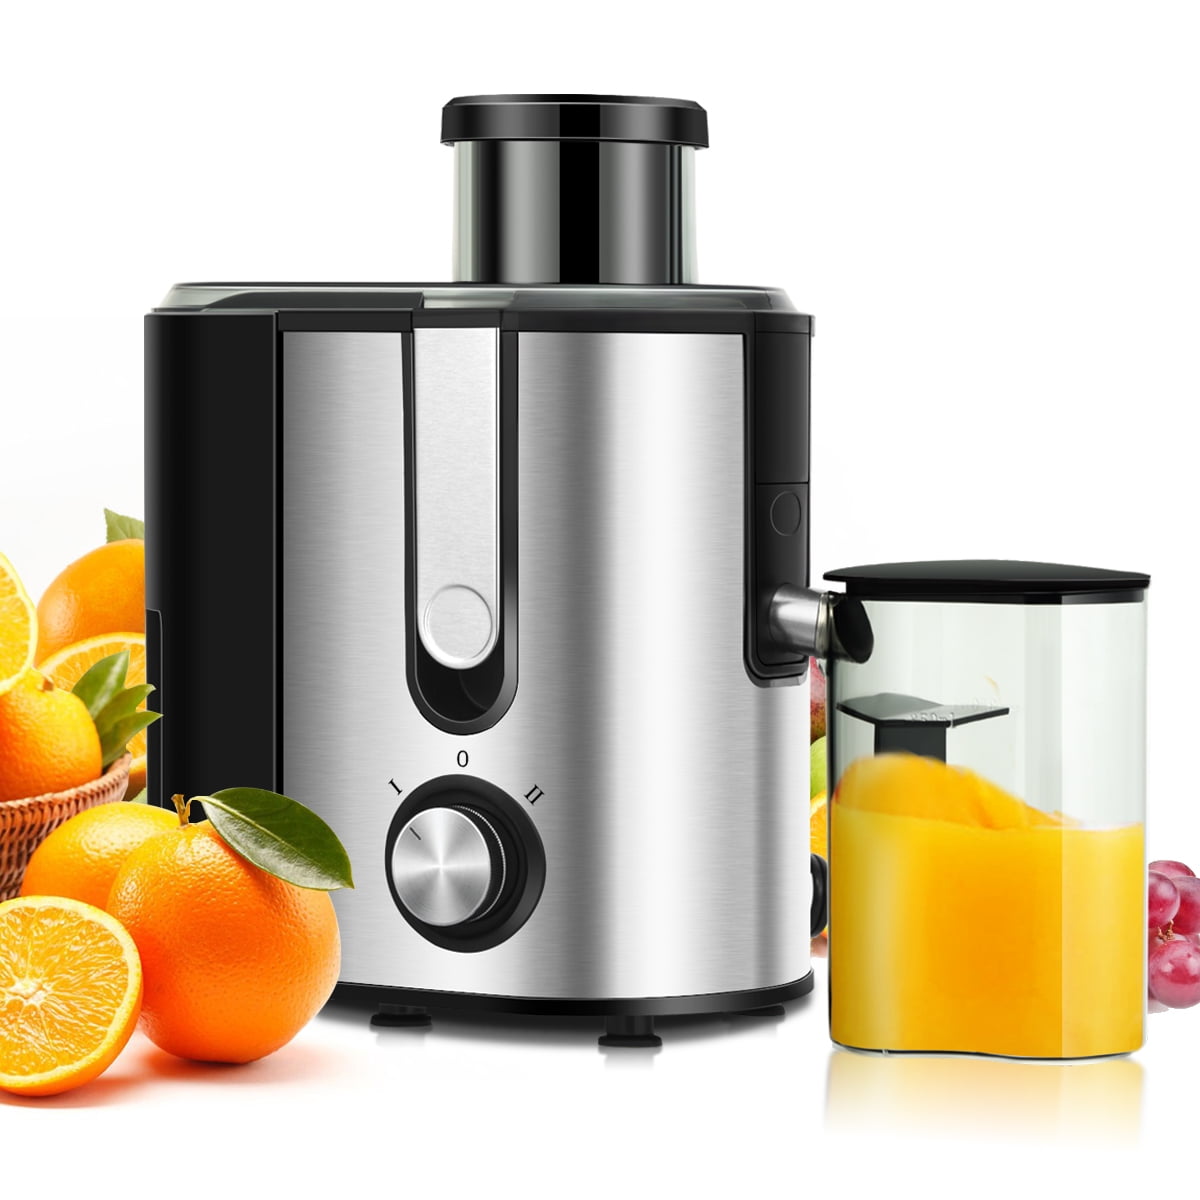 2019 New Version Centrifugal Juicer Machines Included Brush Lighter & Powerful Easy to Clean & BPA-Free Dishwasher Safe Joerid Juicer, 400W Juice Extractor with Spout Adjustable 